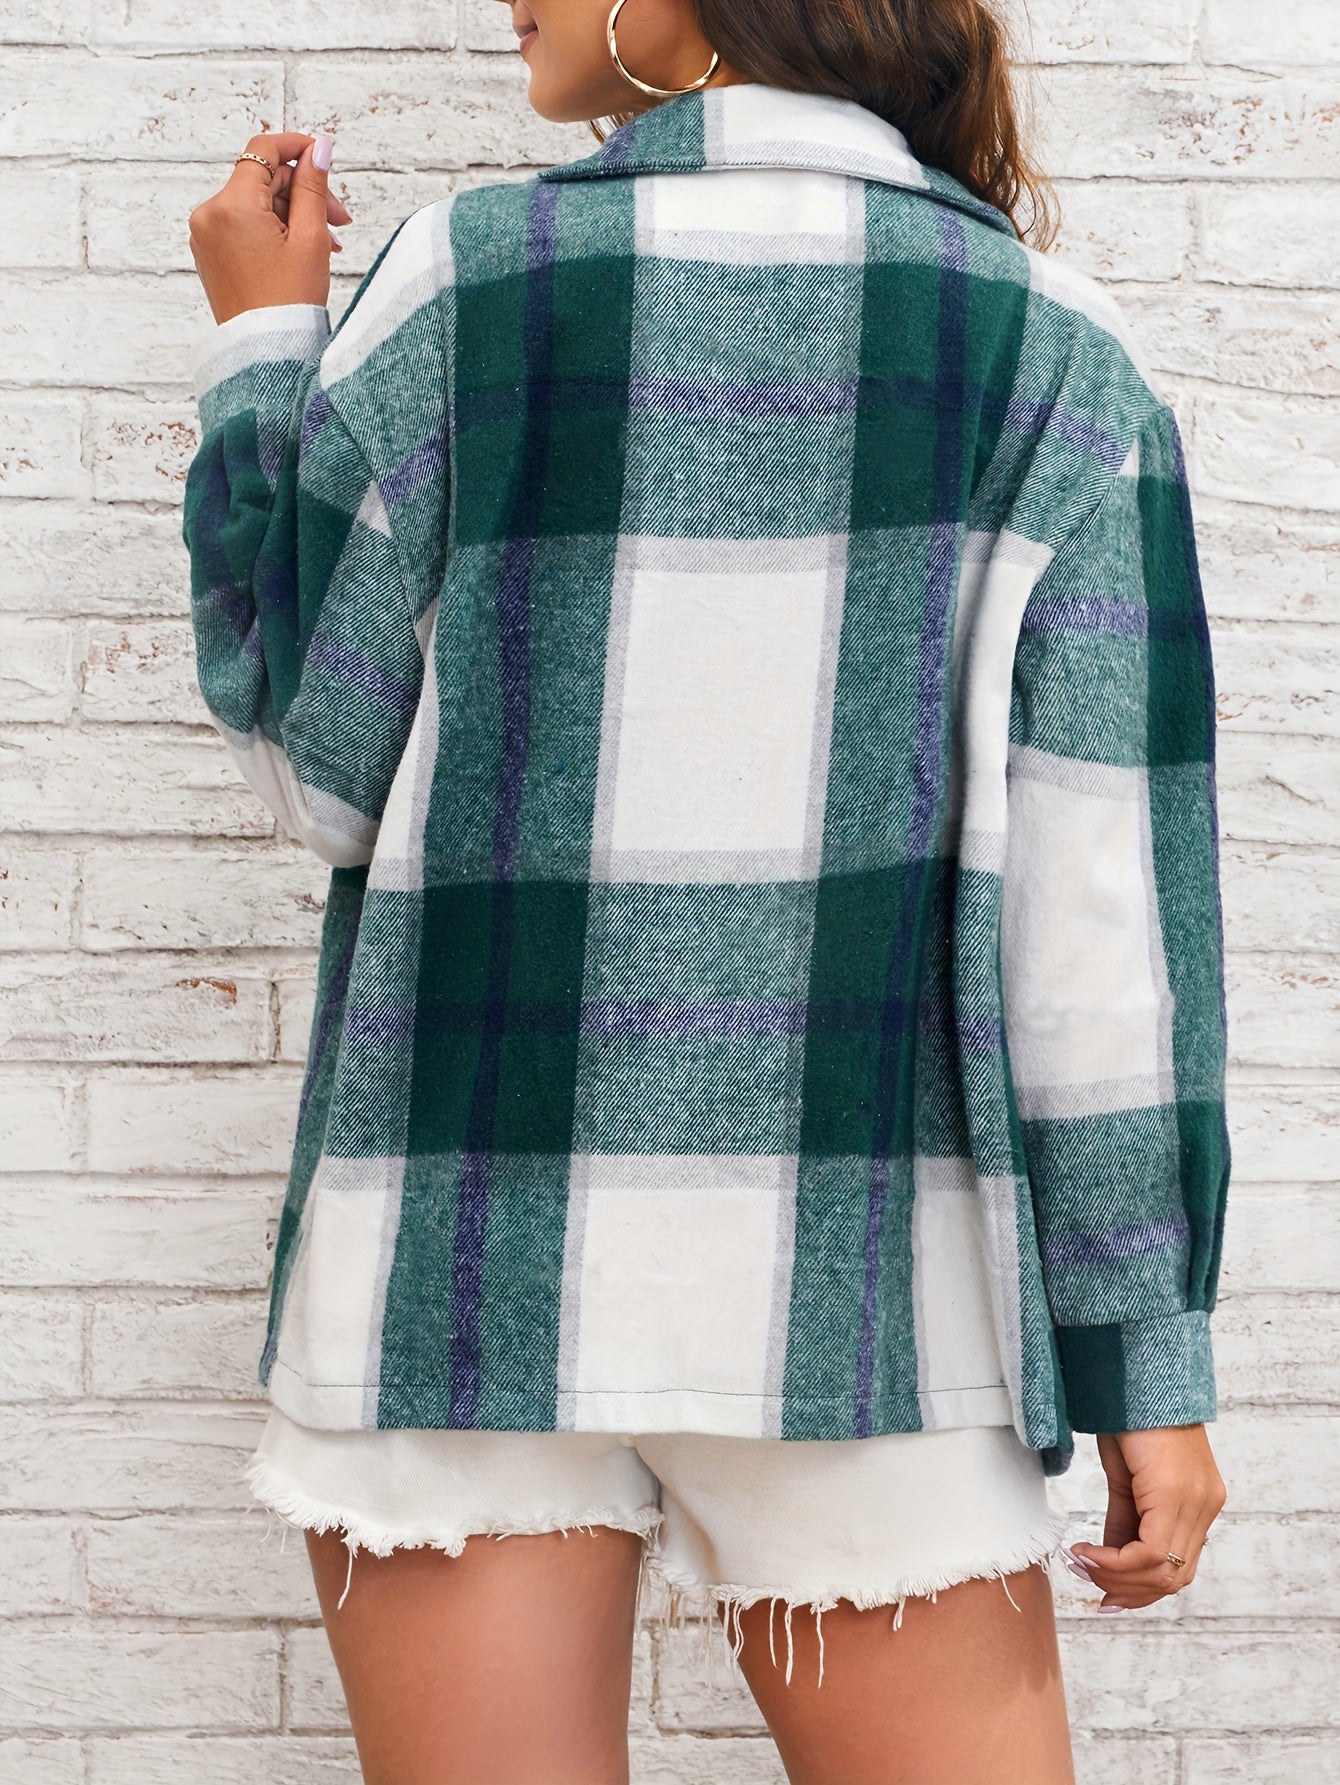 Antmvs Oversized Plaid Shirt, Long Sleeve Button Up Casual Top For Spring & Fall, Women's Clothing